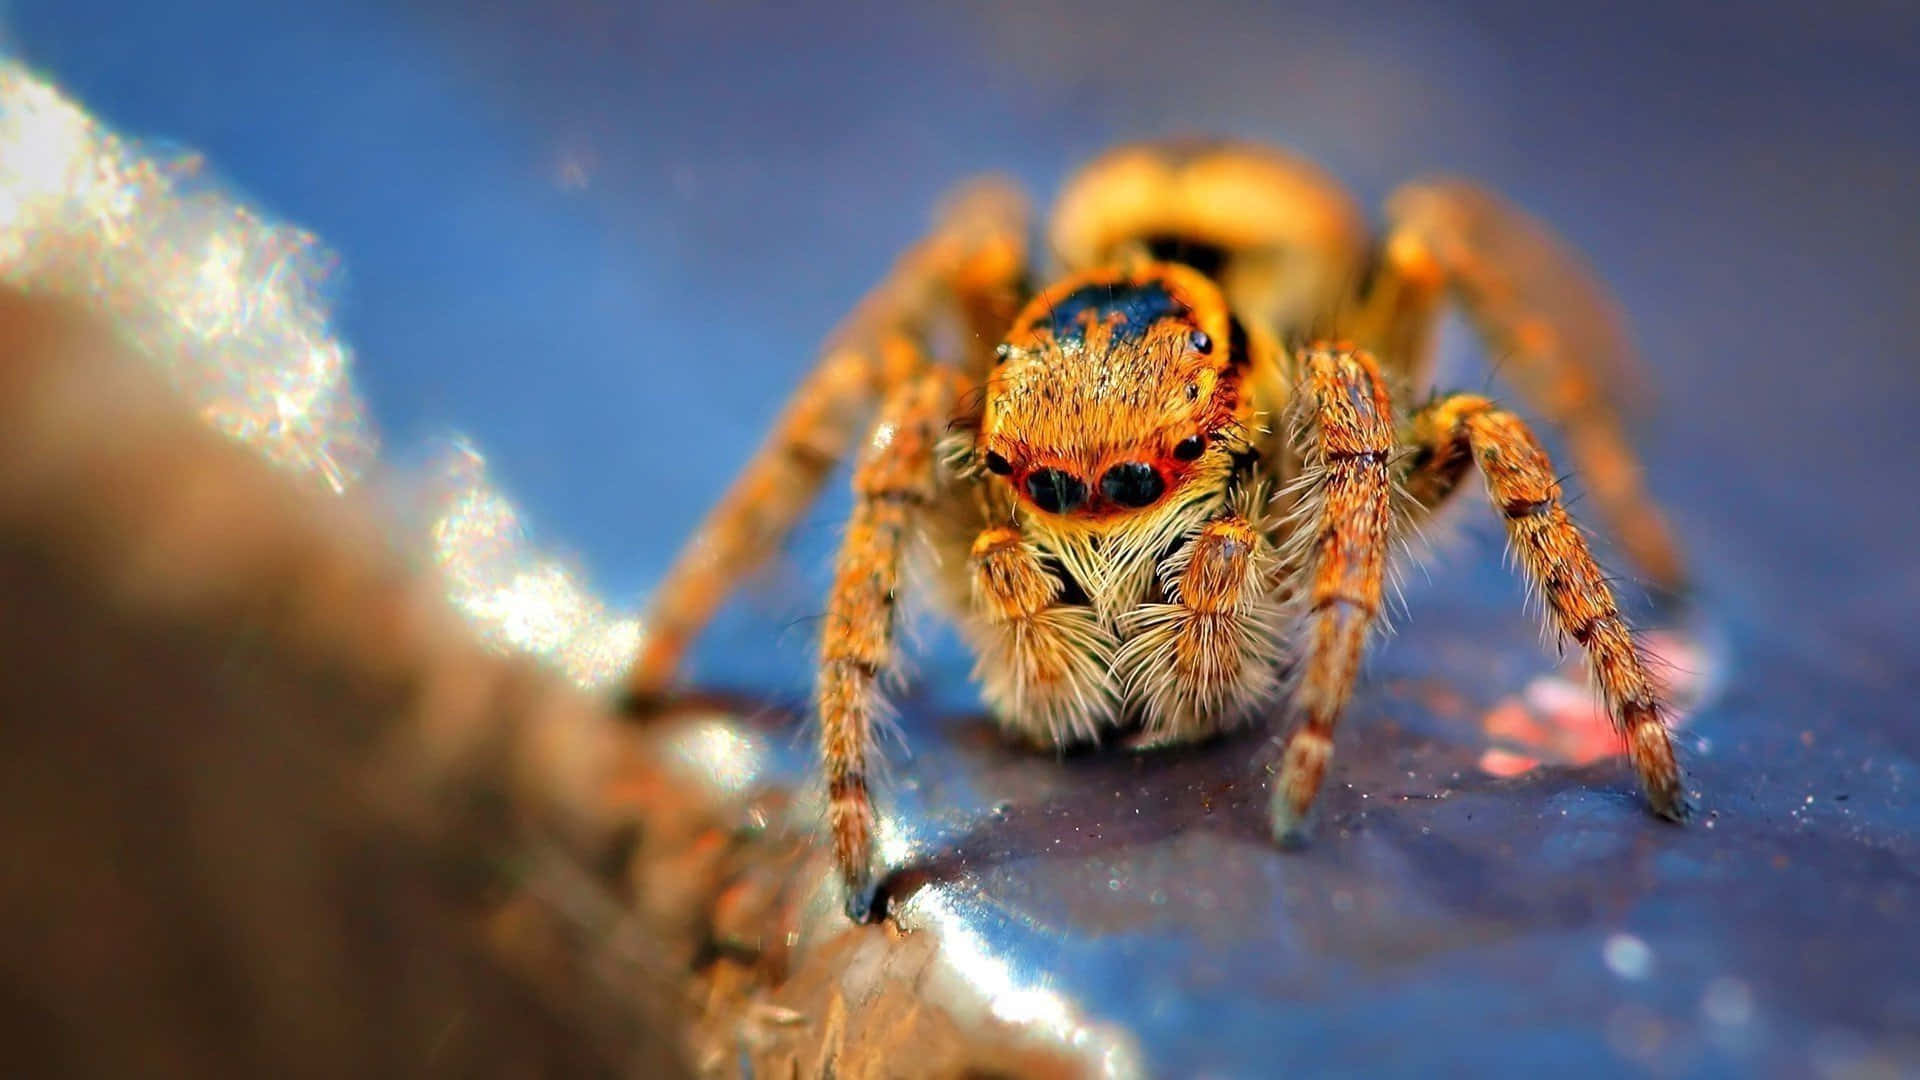 A Close Up of a Colorful Spider